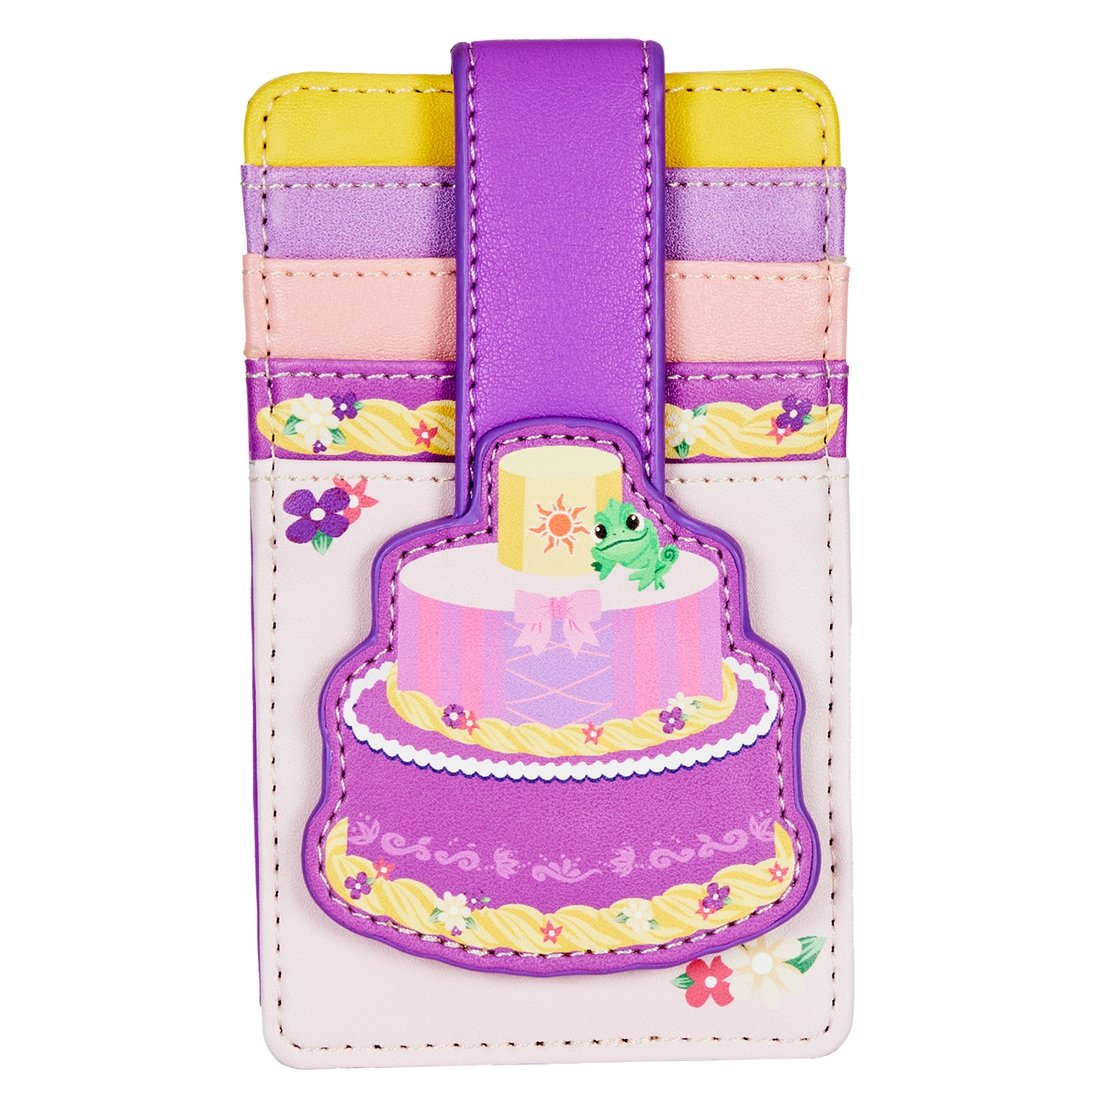 Tangled Cake Card Holder - Rockamilly-Bags & Purses-Vintage